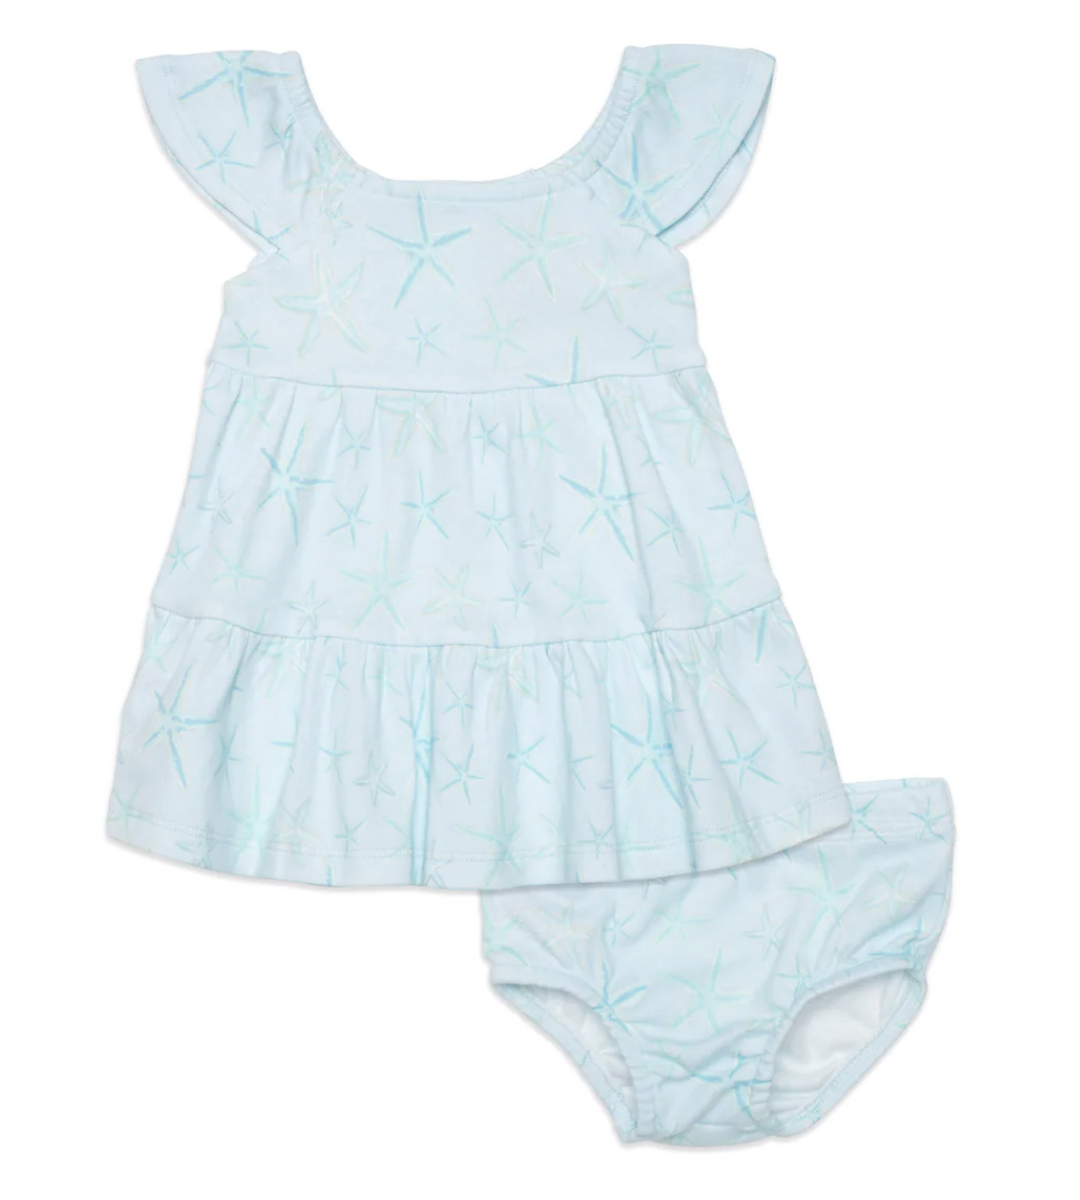 Shine Bright Like a Starfish Organic Magnetic Infant Dress with Diaper Cover